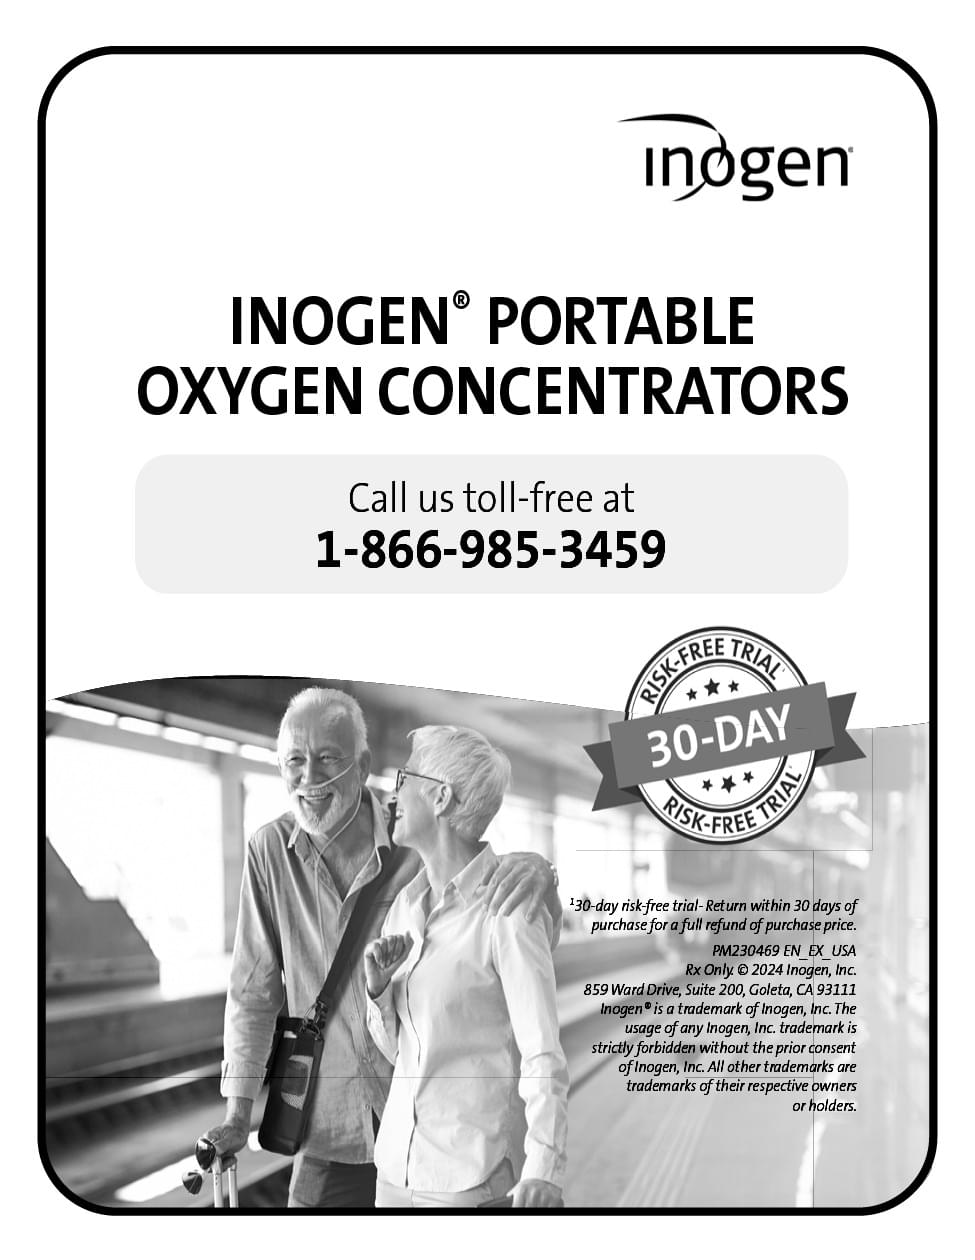 Inogen Portable Oxygen Call 1-866-985-3459 for a 30 Risk-Free Trial